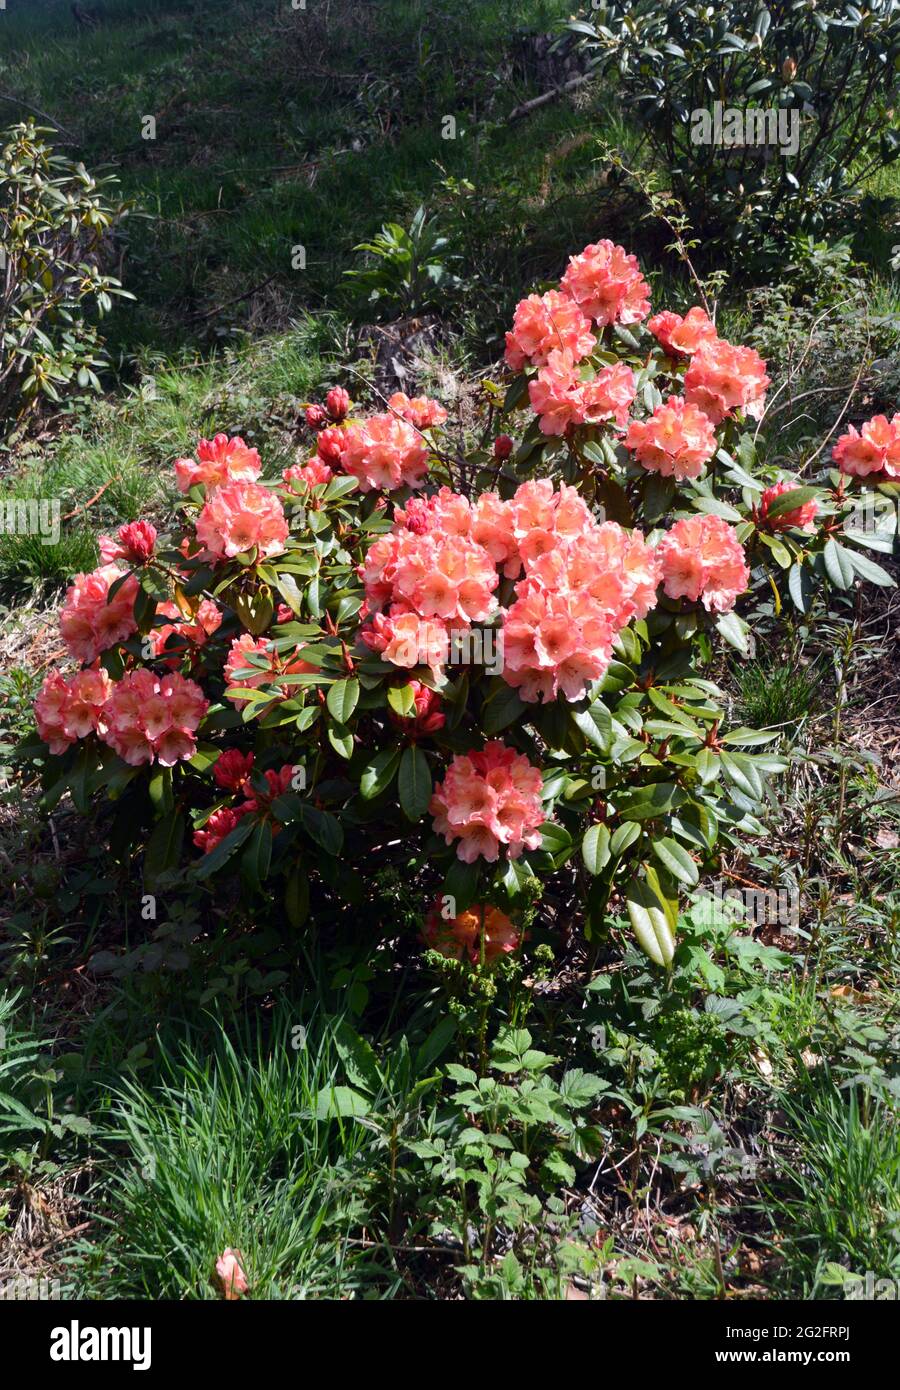 Pink Coloured Rhododendron Flowers on Display at the Himalayan Garden & Sculpture Park, Grewelthorpe, Ripon, North Yorkshire, England, UK. Stock Photo